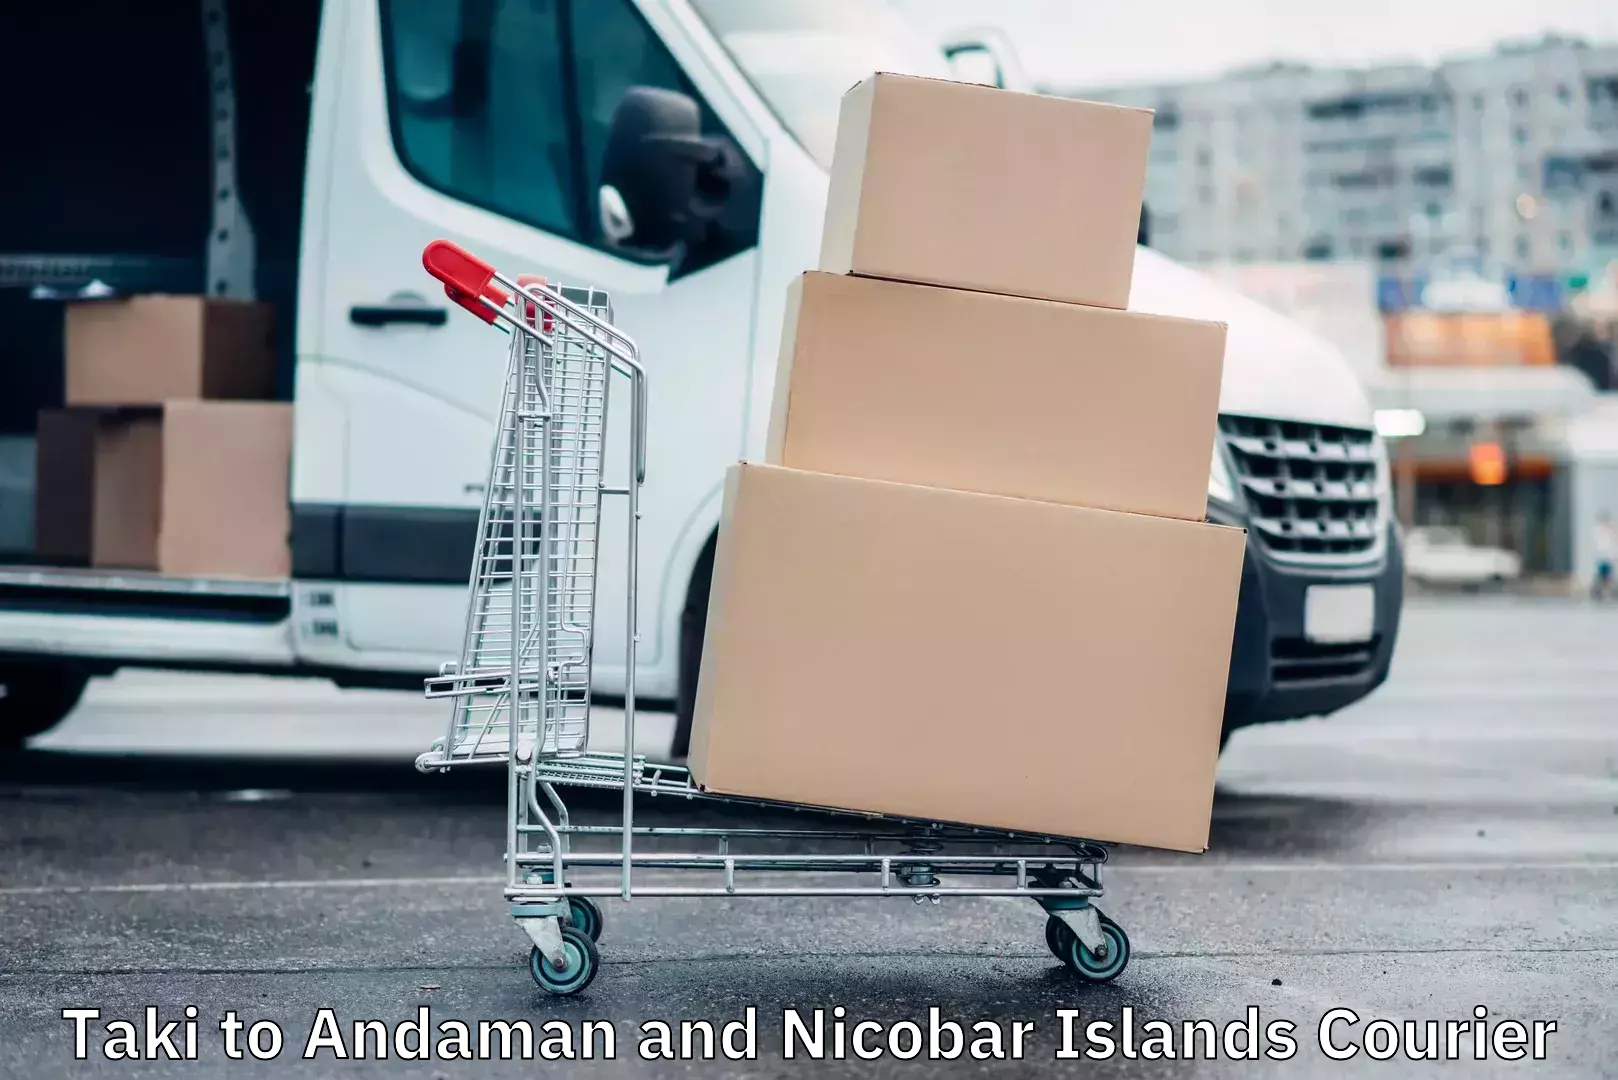 Round-the-clock parcel delivery Taki to Andaman and Nicobar Islands